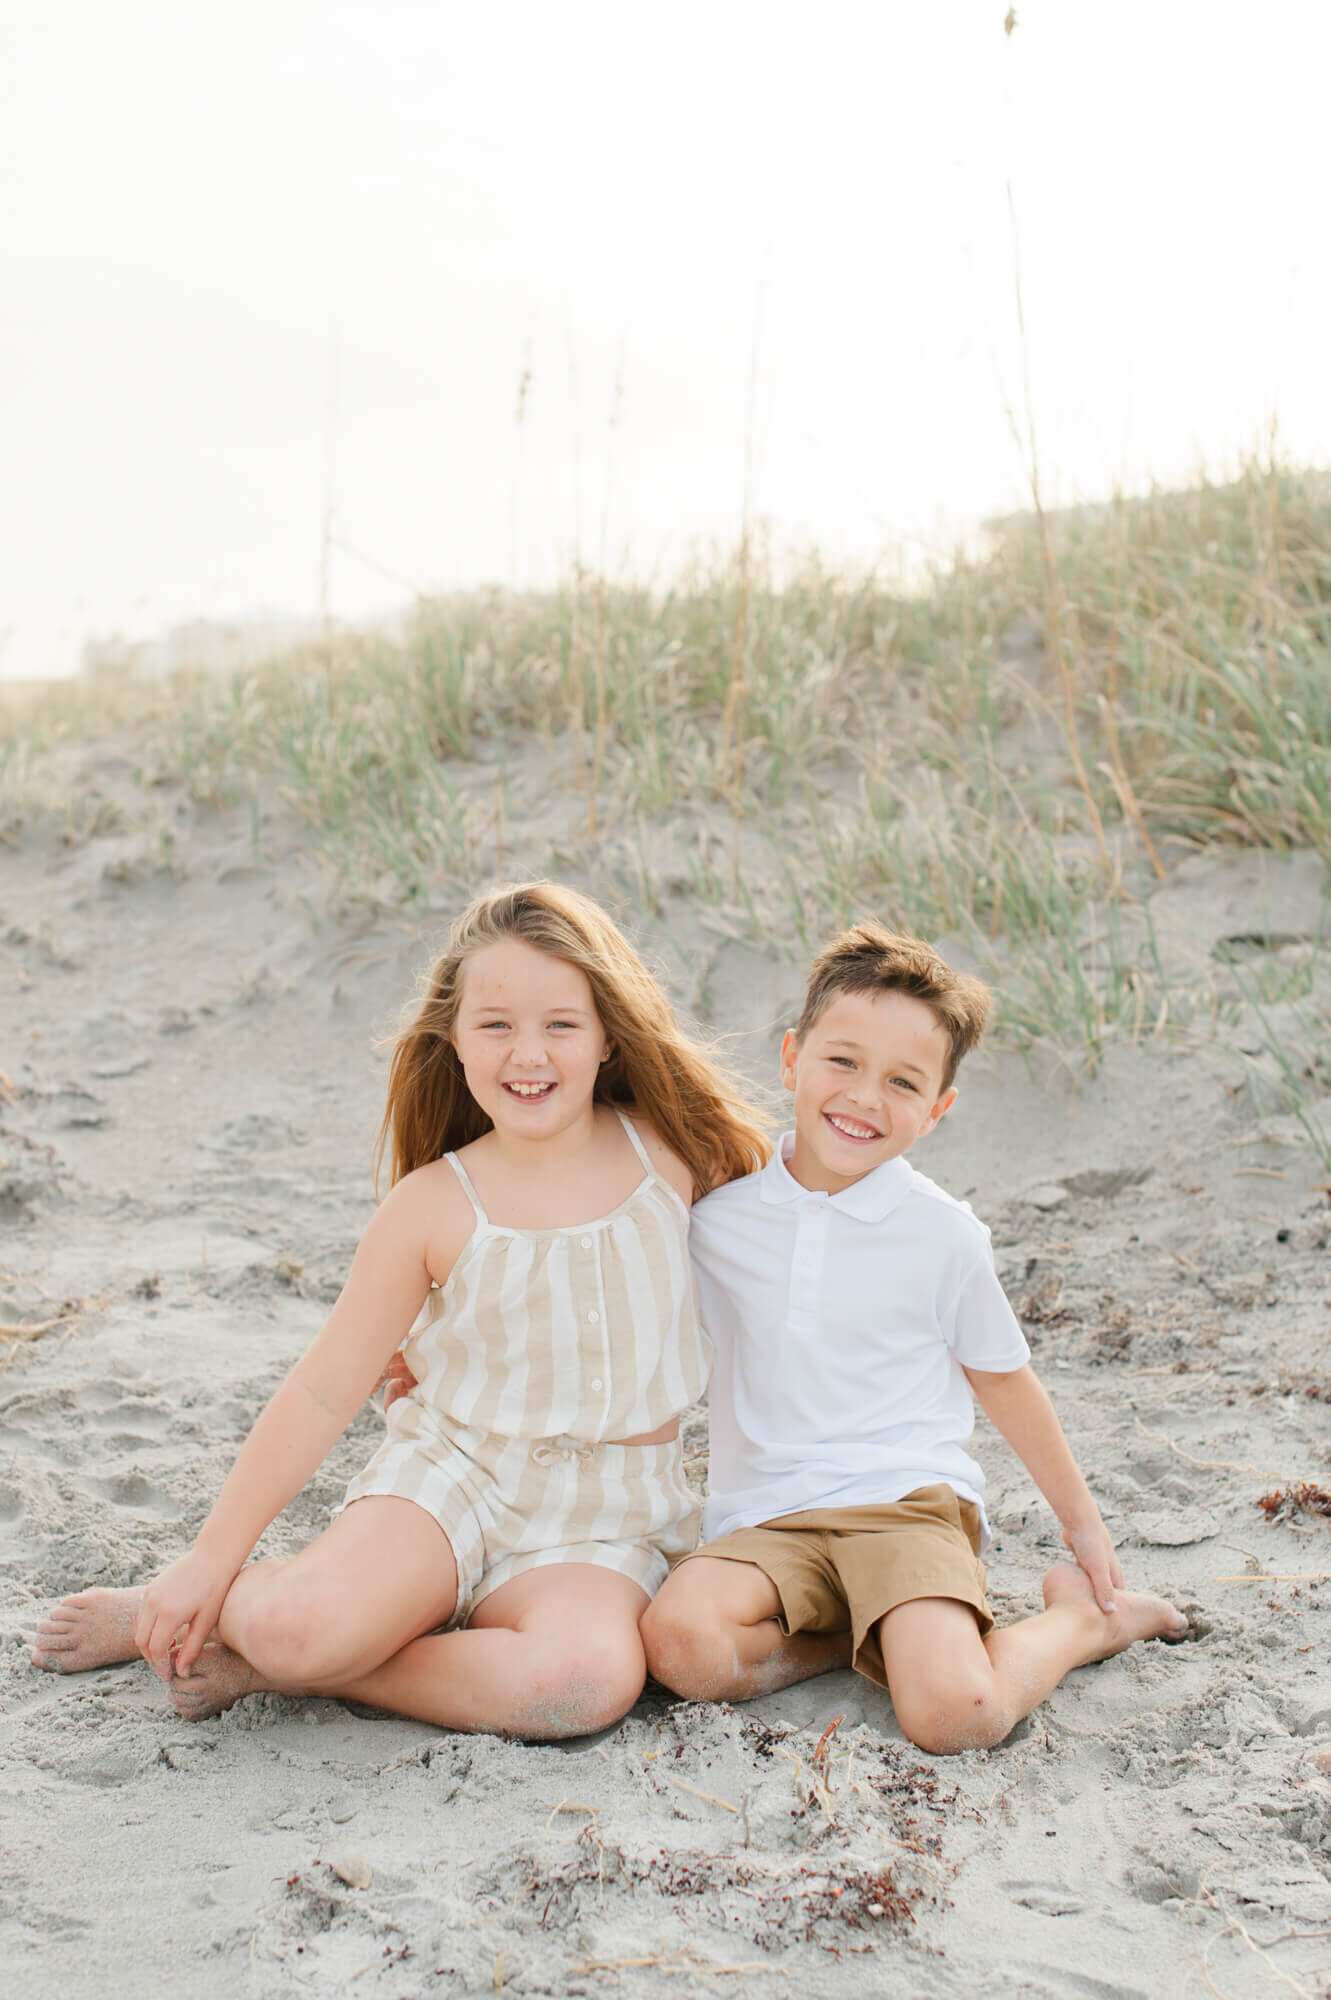 St Augustine photographer captures siblings hugging while sitting in the dunes at sunset